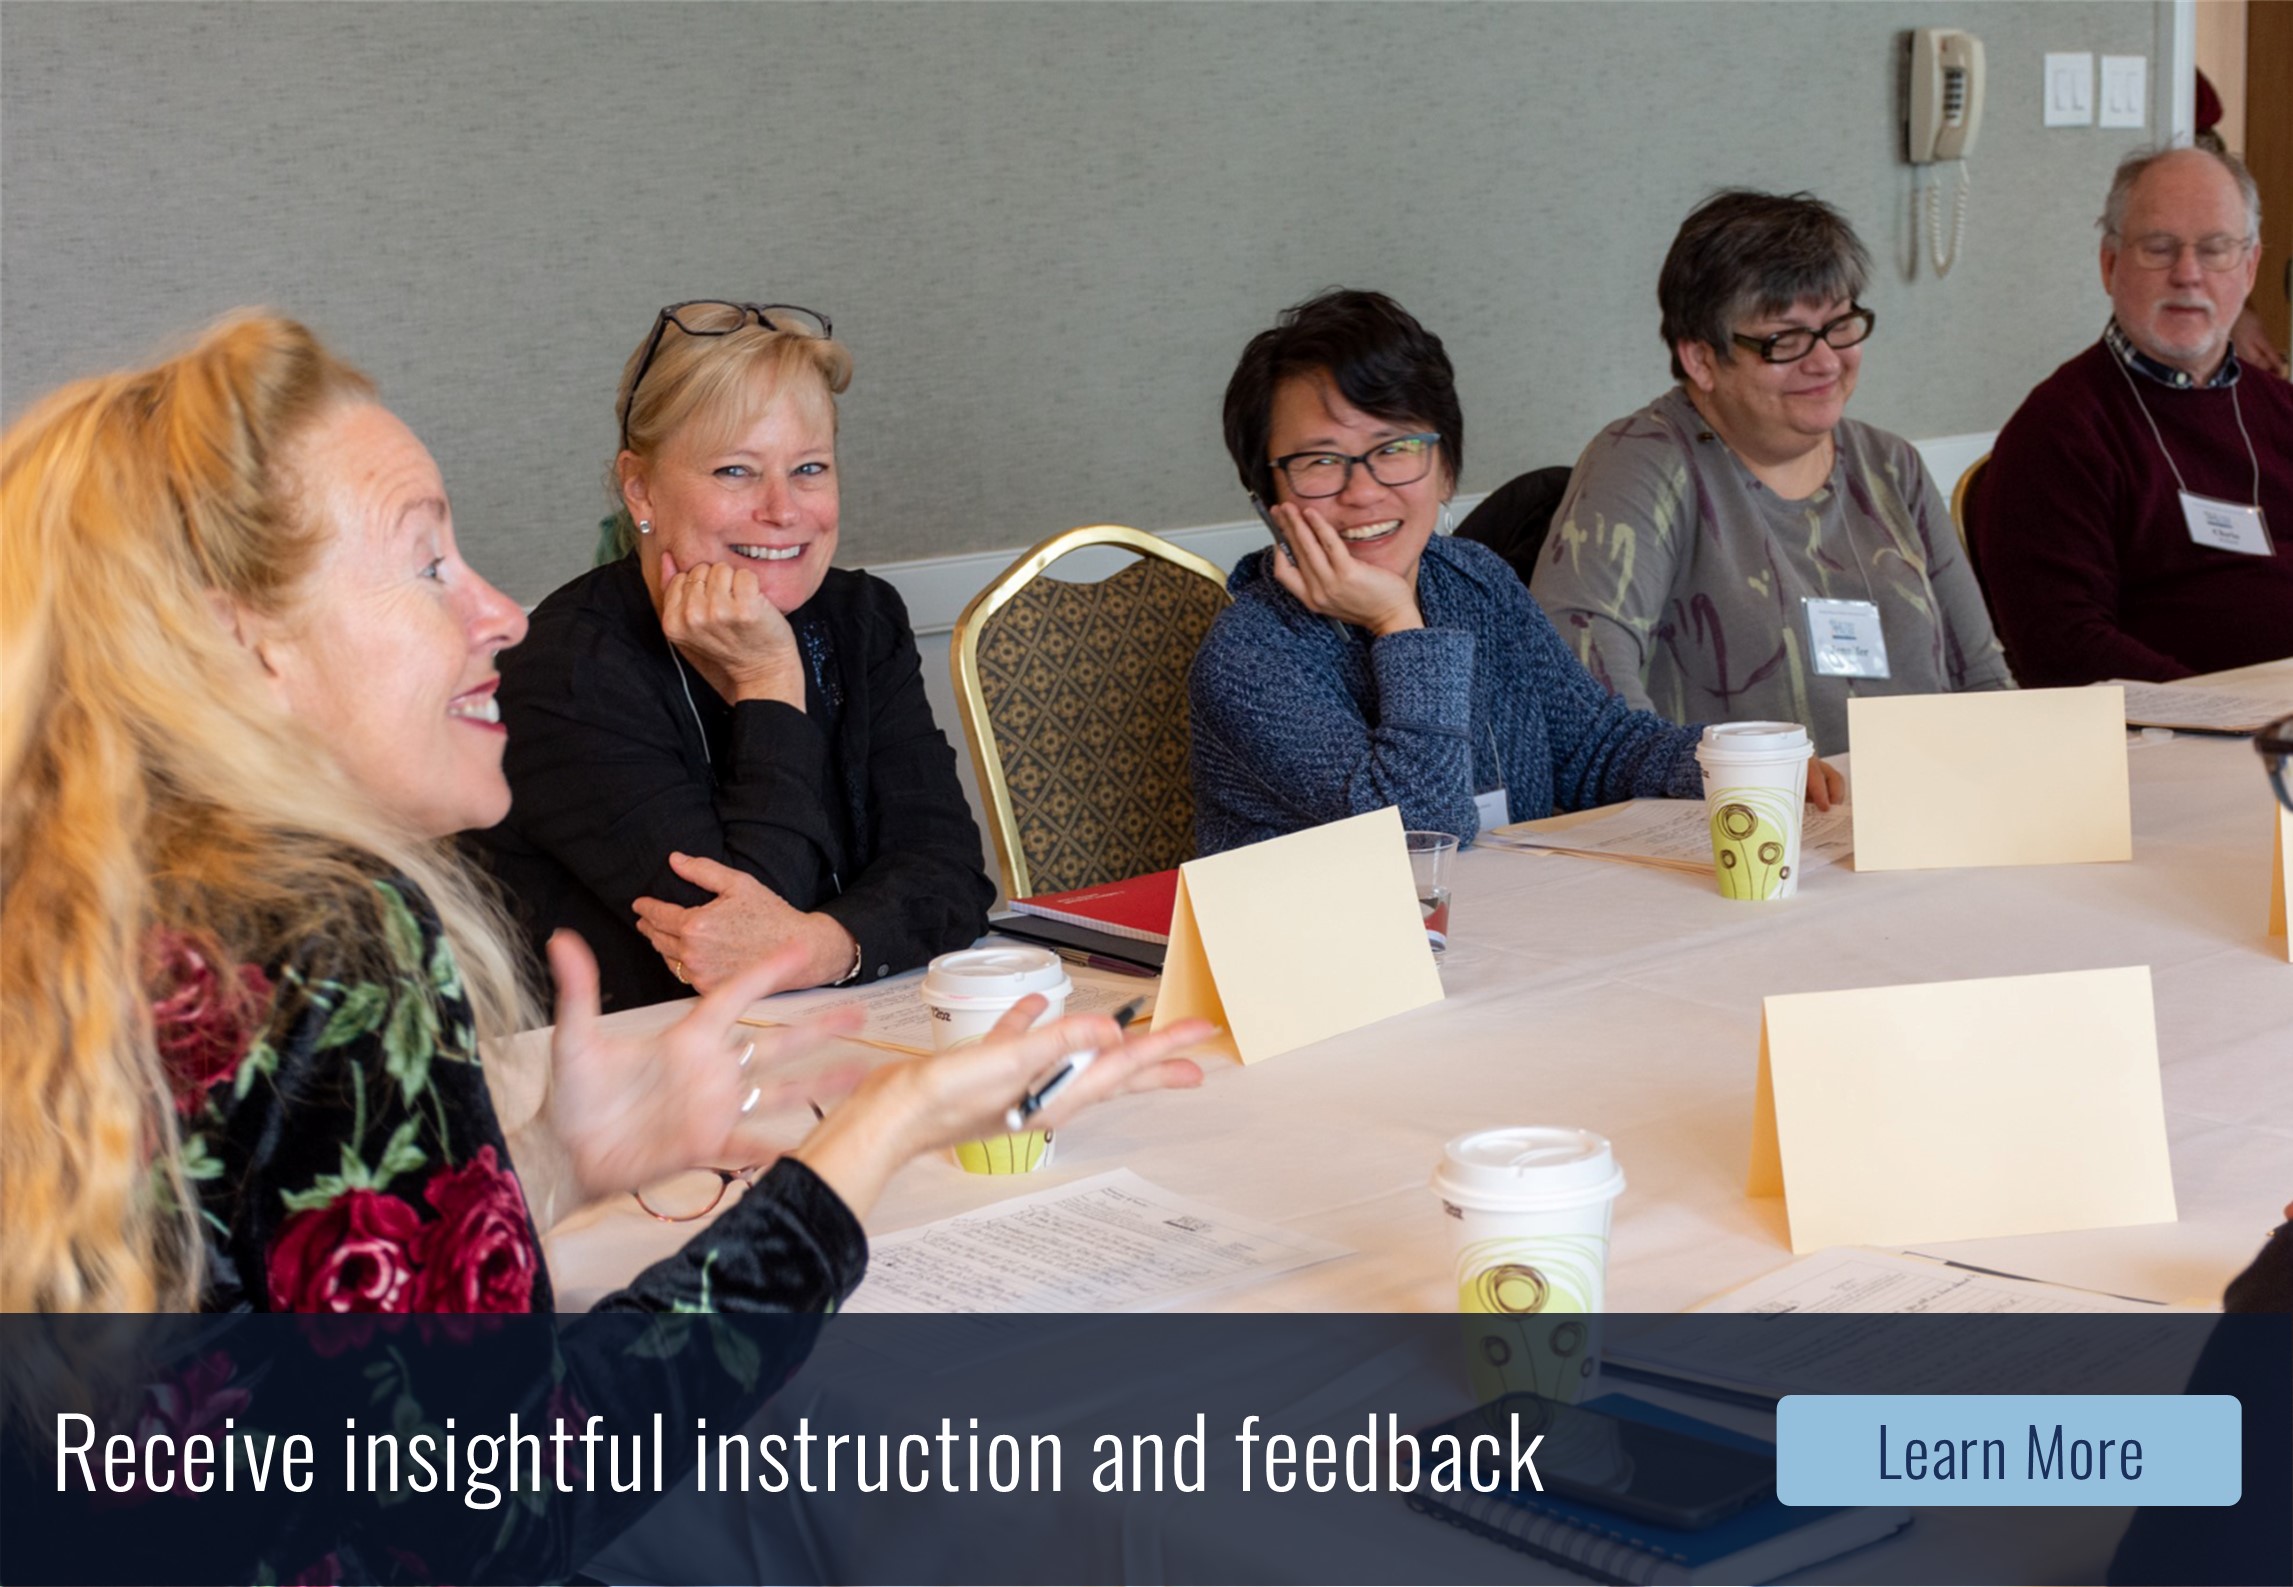 Receive insightful instruction and feedback